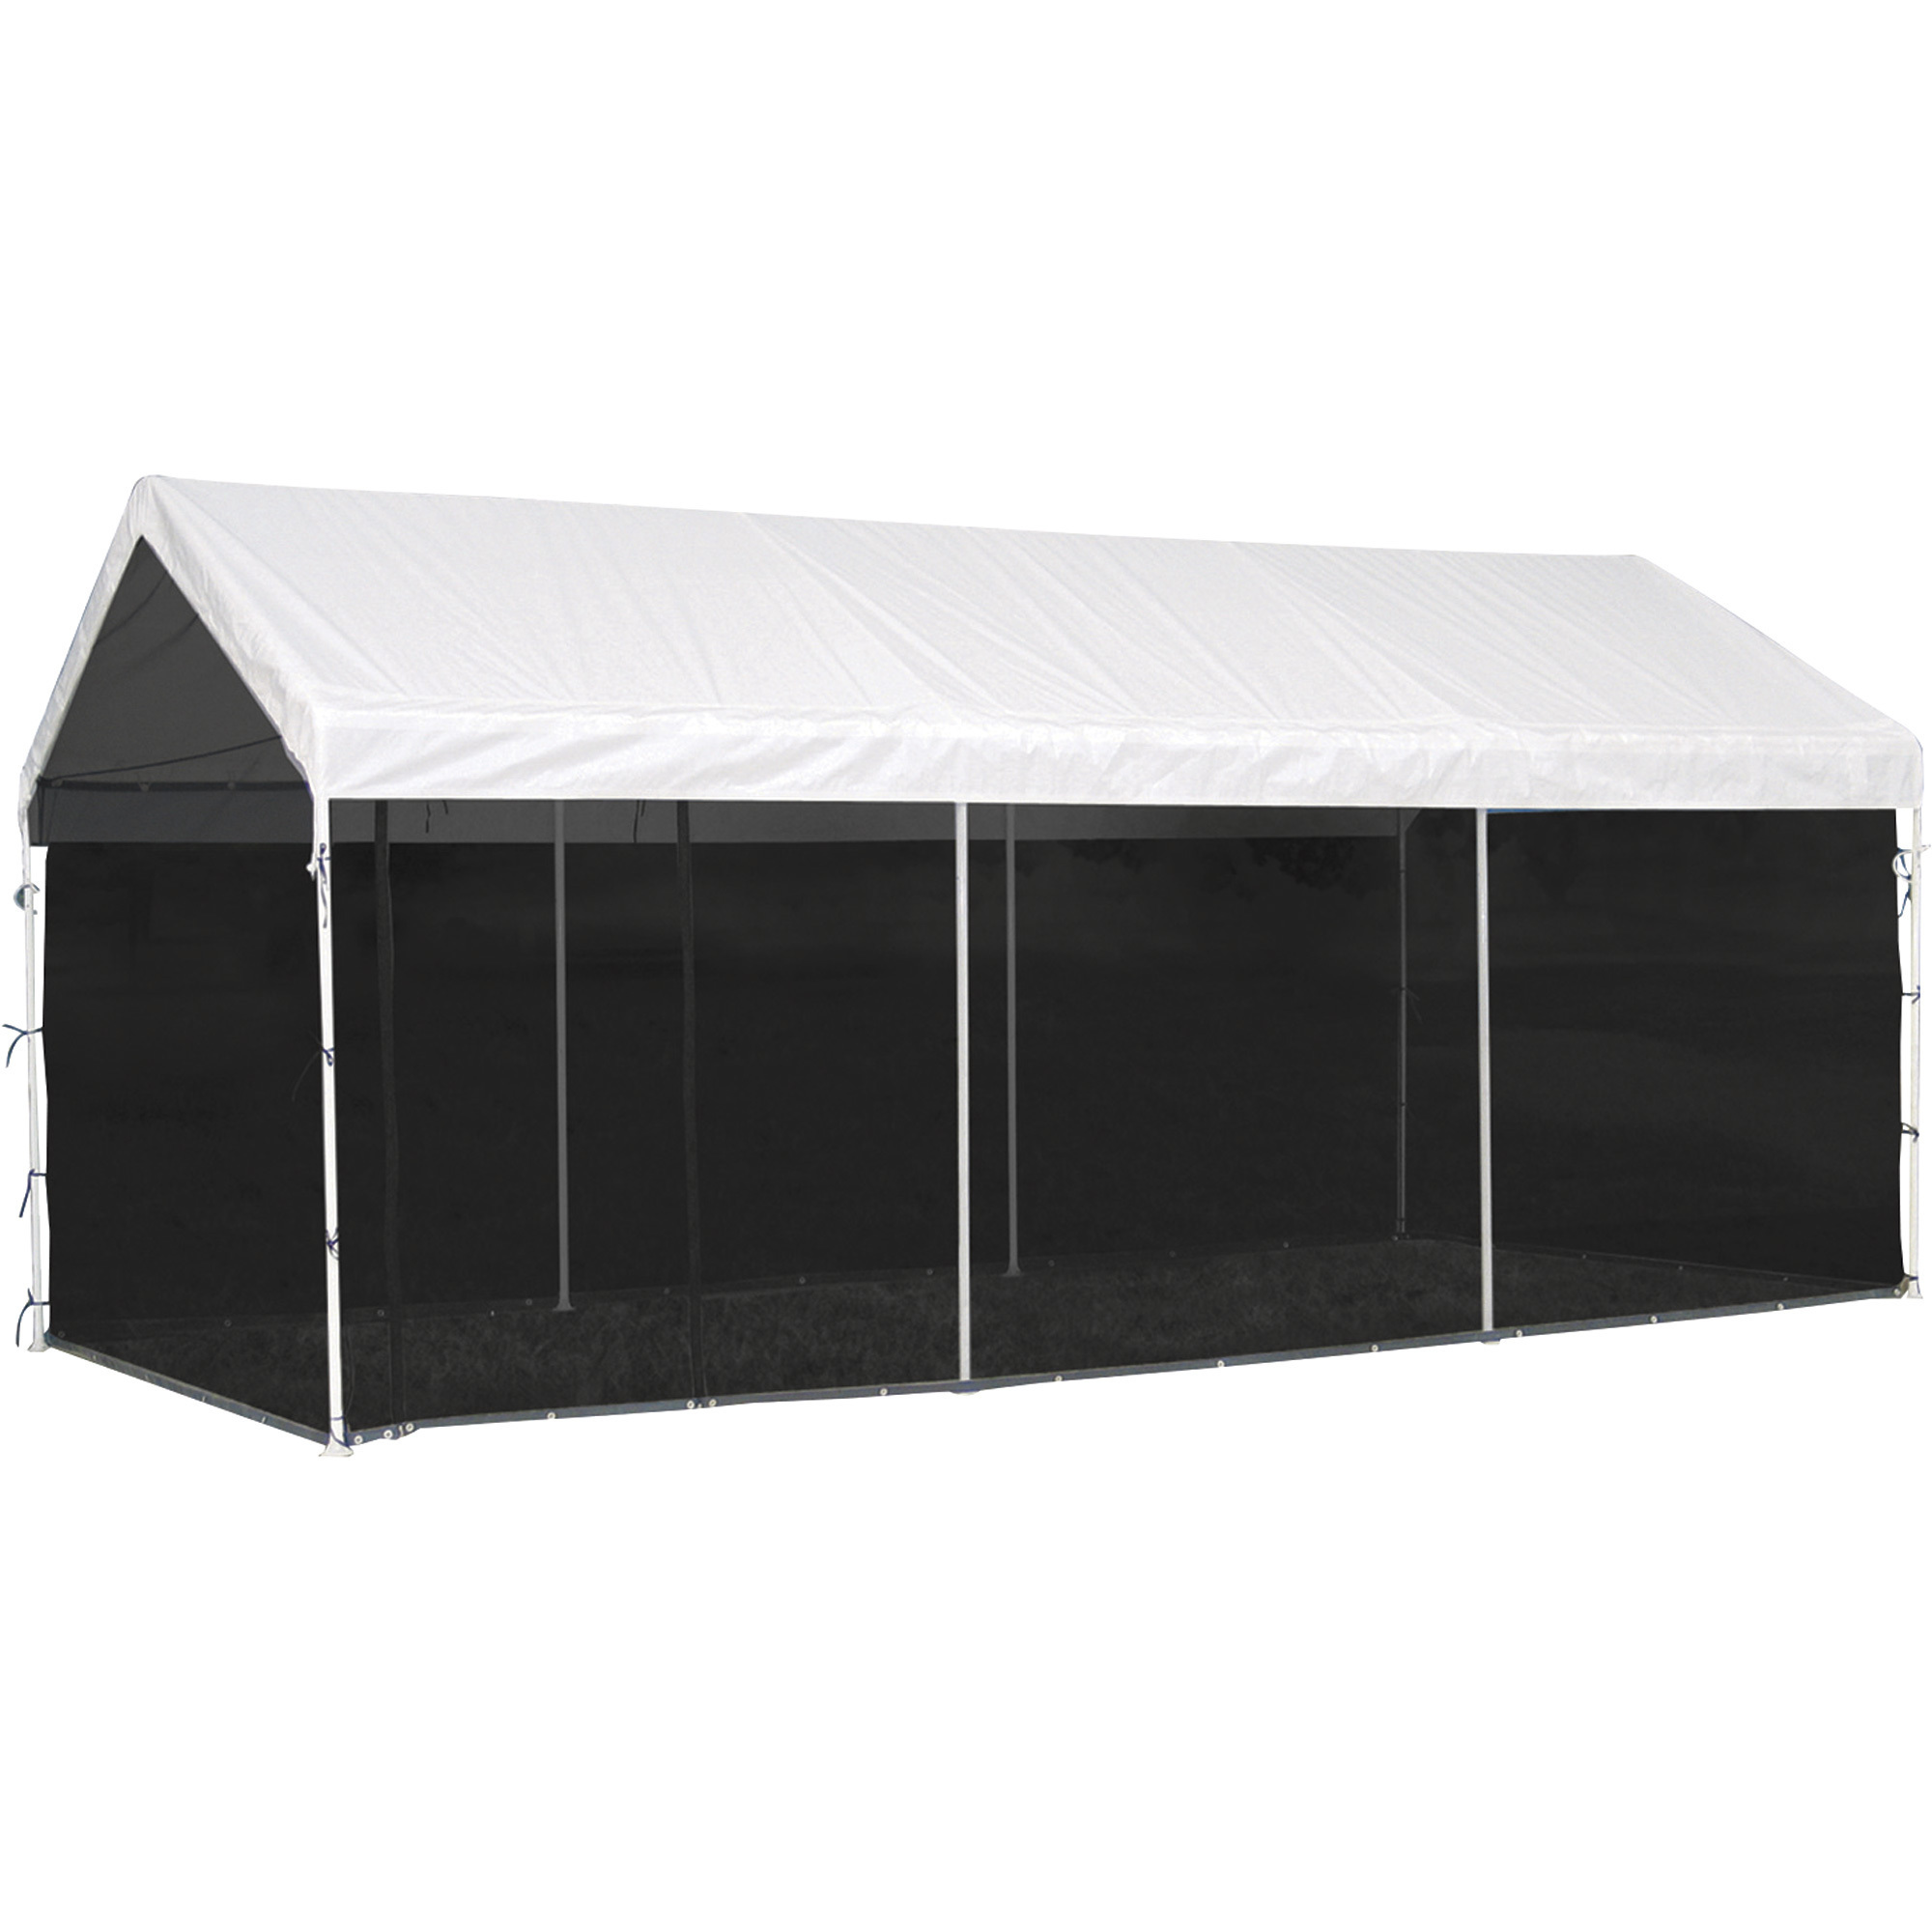 ShelterLogic Screen House Kit for Max AP 20ft. x 10ft. Outdoor Canopy Tent, Fits Item# 55418 and 55420, Model 25777